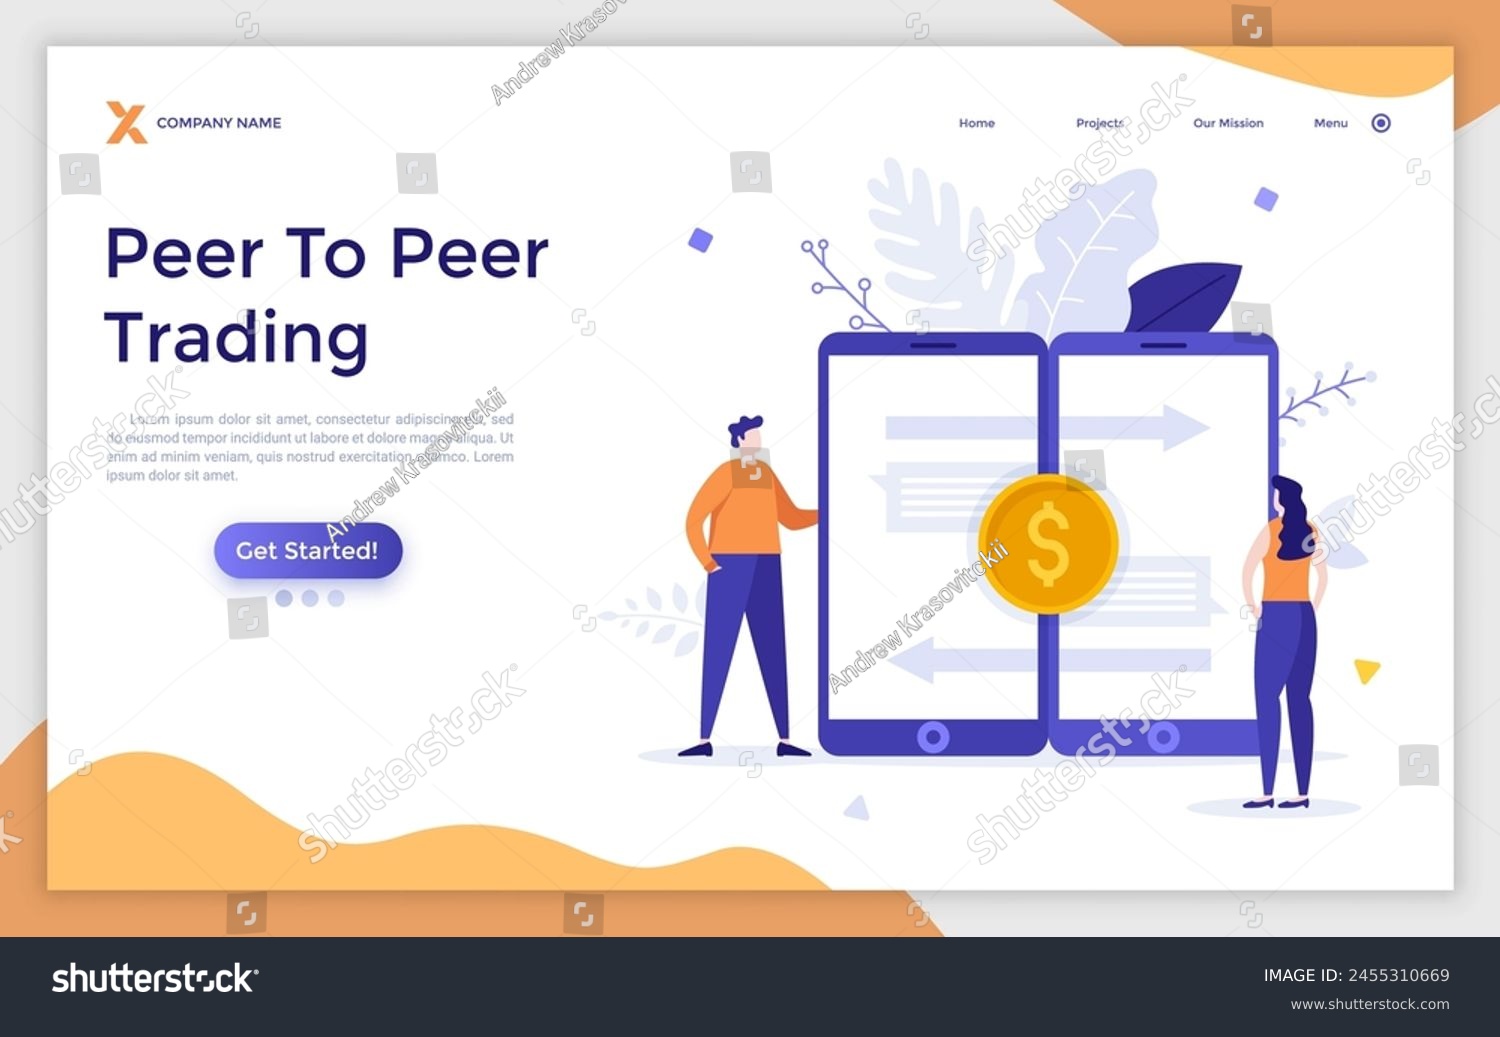 SVG of Landing page with Man, woman, two smartphones and golden dollar coin. Peer-to-peer payment, transfer of funds between banking accounts via mobile app. Modern flat vector illustration svg